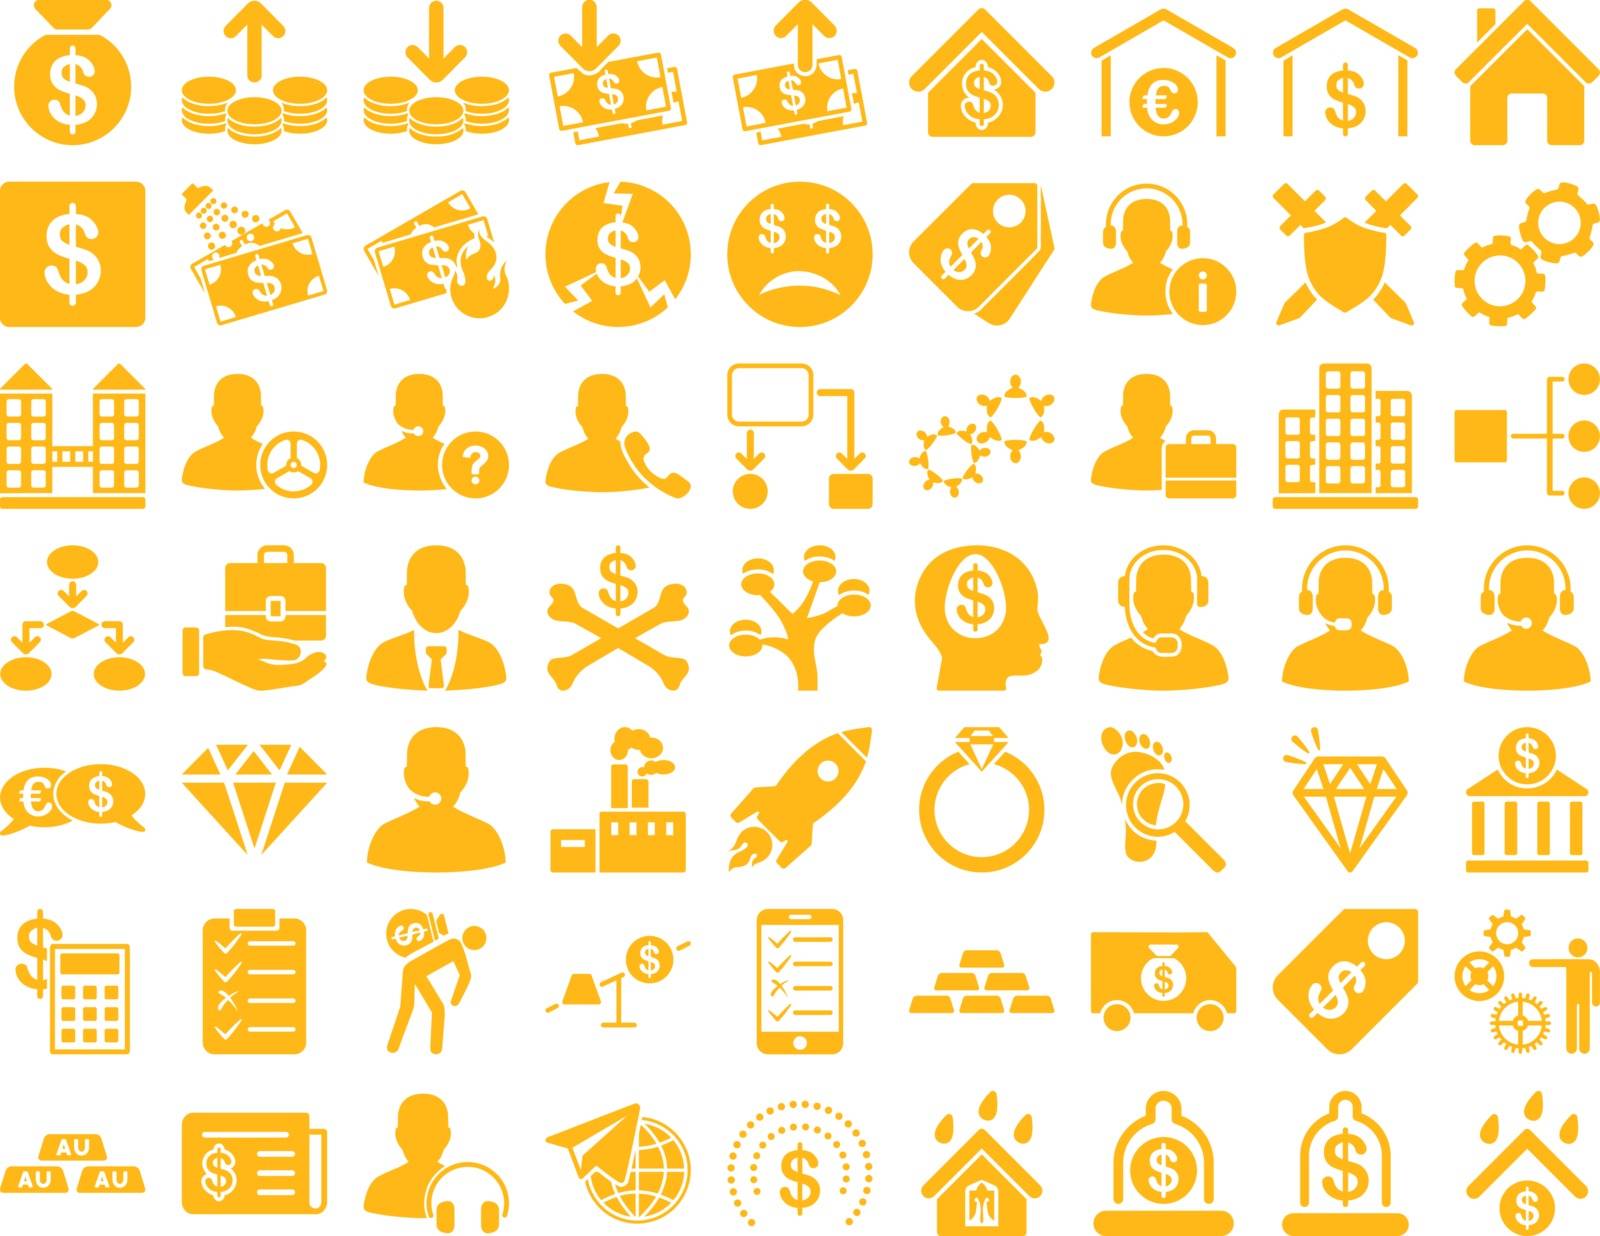 Commerce Icons. These flat icons use yellow color. Vector images are isolated on a white background.